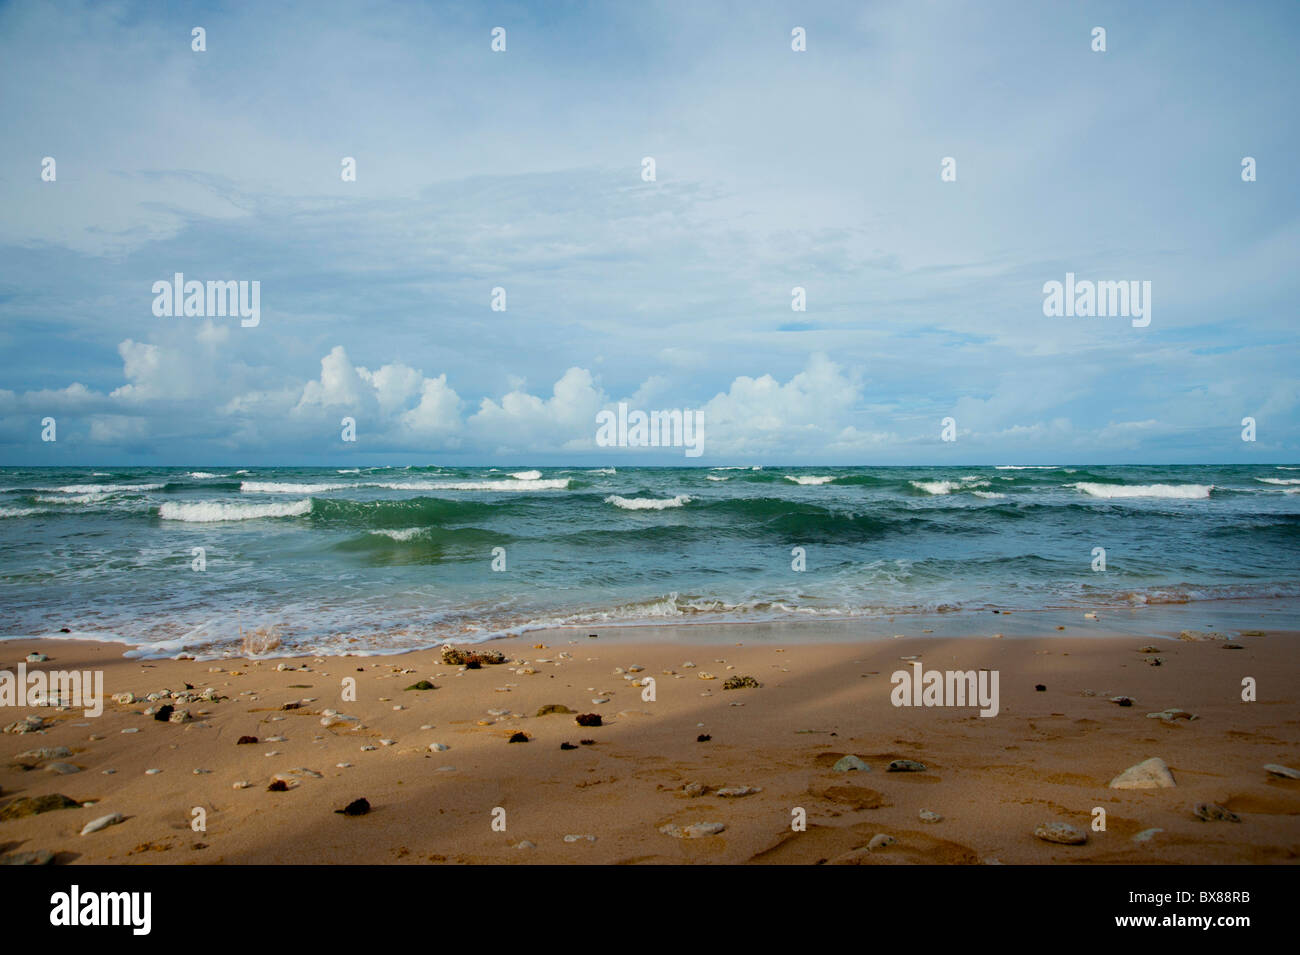 Waves gently breaking on the beach in Barbados with clouds in the distance Stock Photo